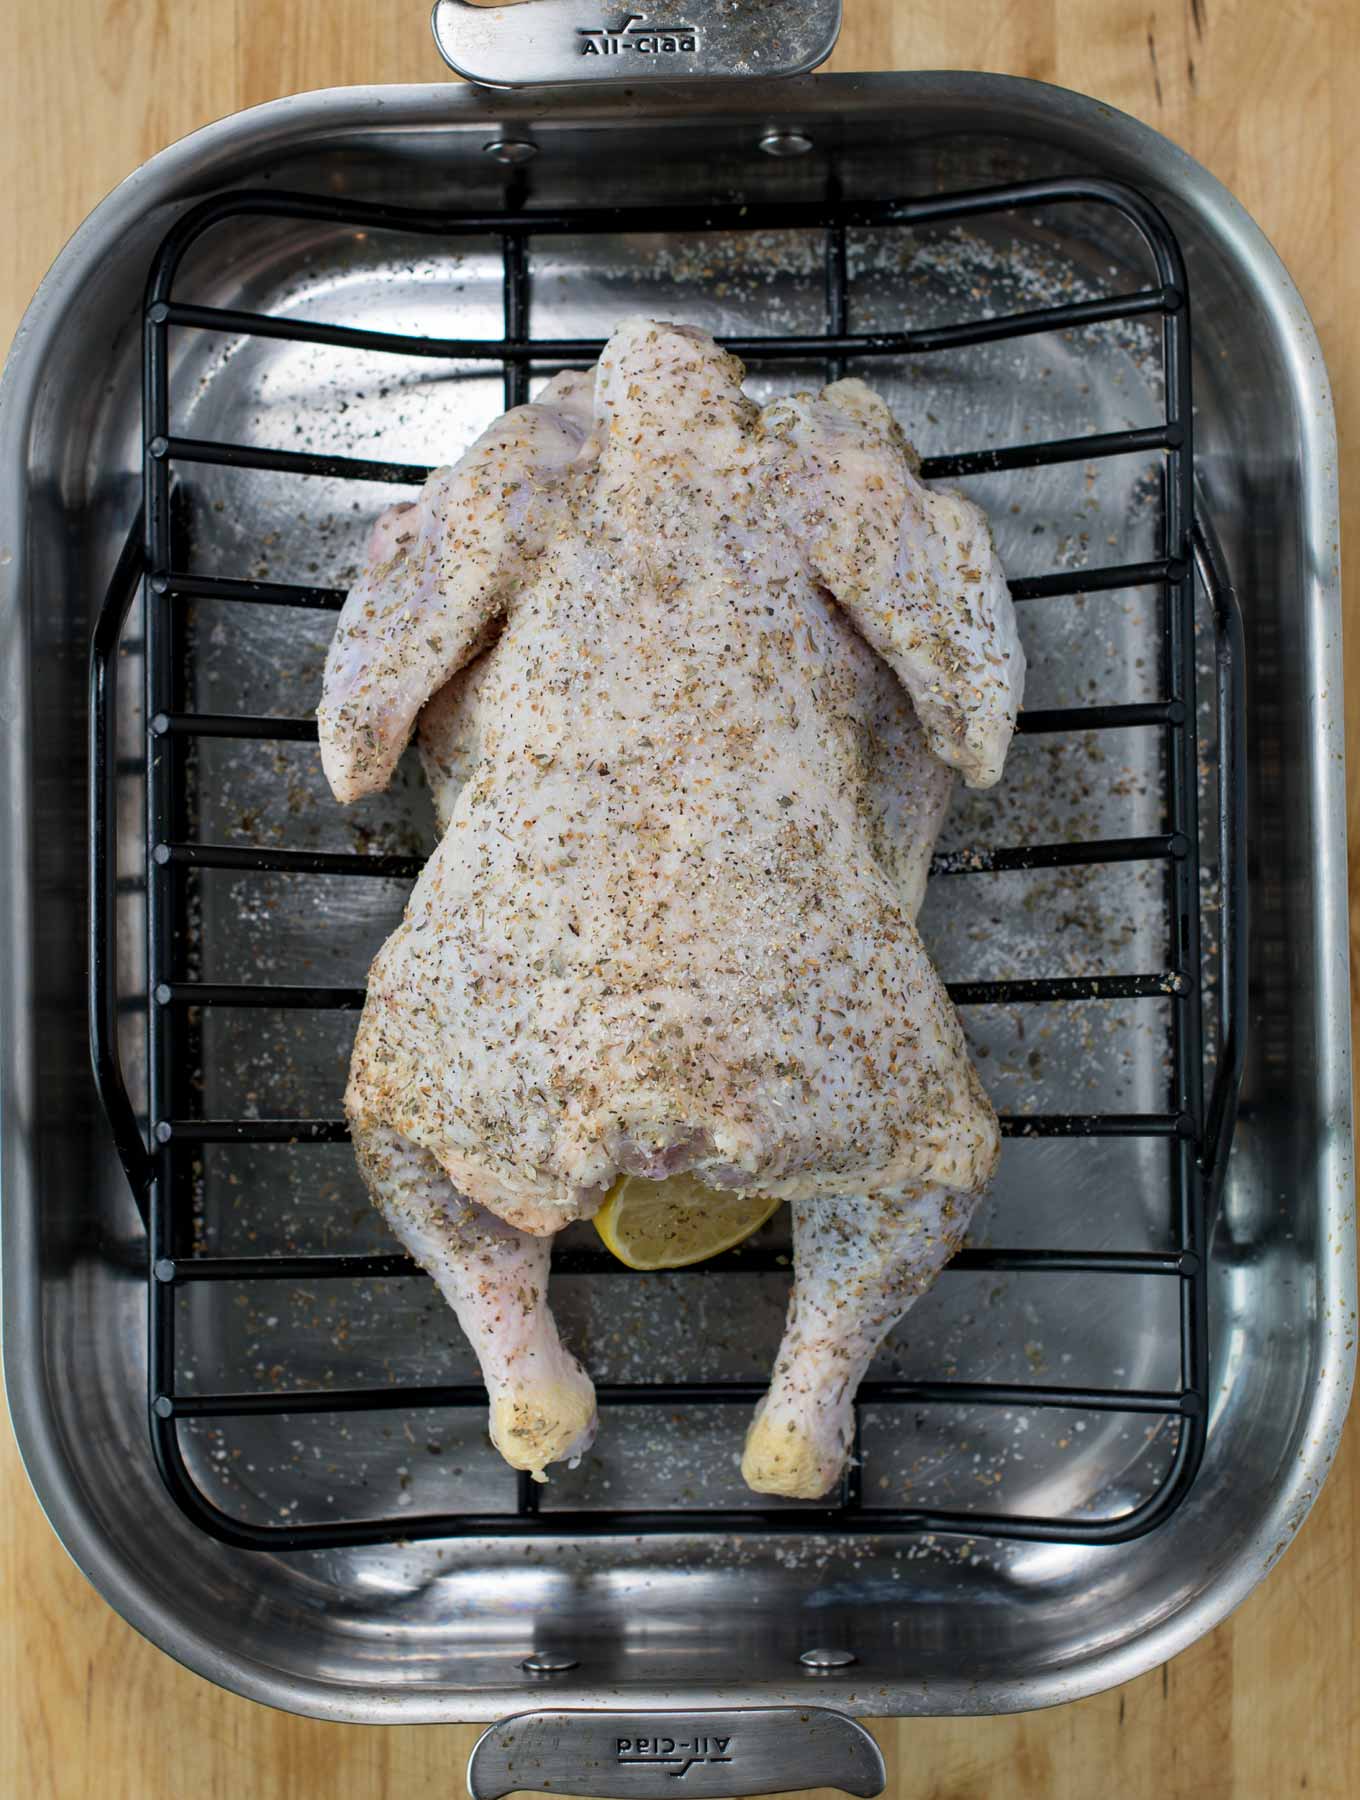 Whole chicken in a roasting pan before cooking